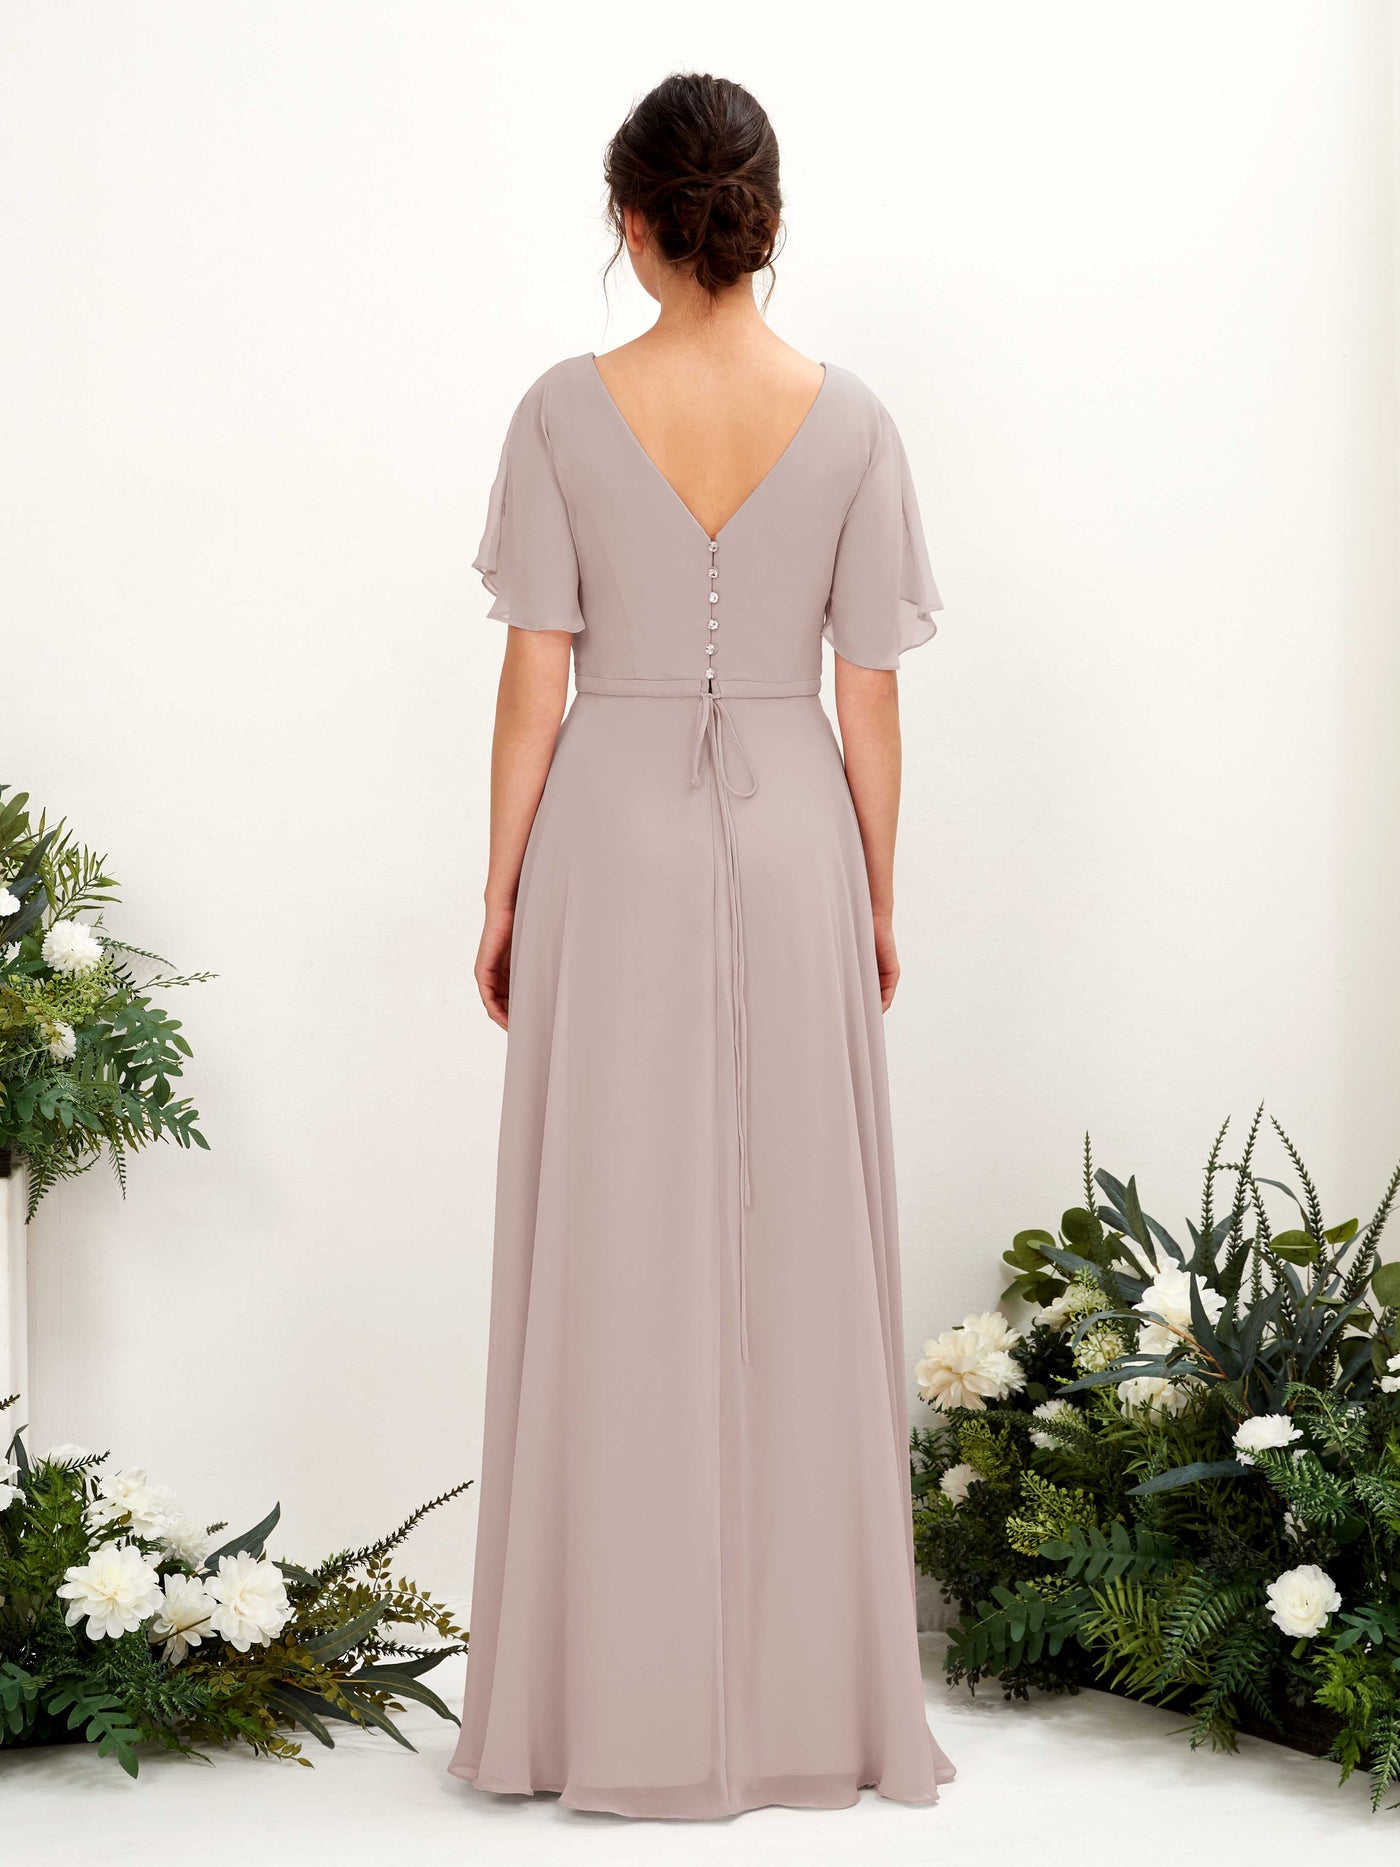 Taupe Bridesmaid Dresses Bridesmaid Dress A-line Chiffon V-neck Full Length Short Sleeves Wedding Party Dress (81224624)#color_taupe